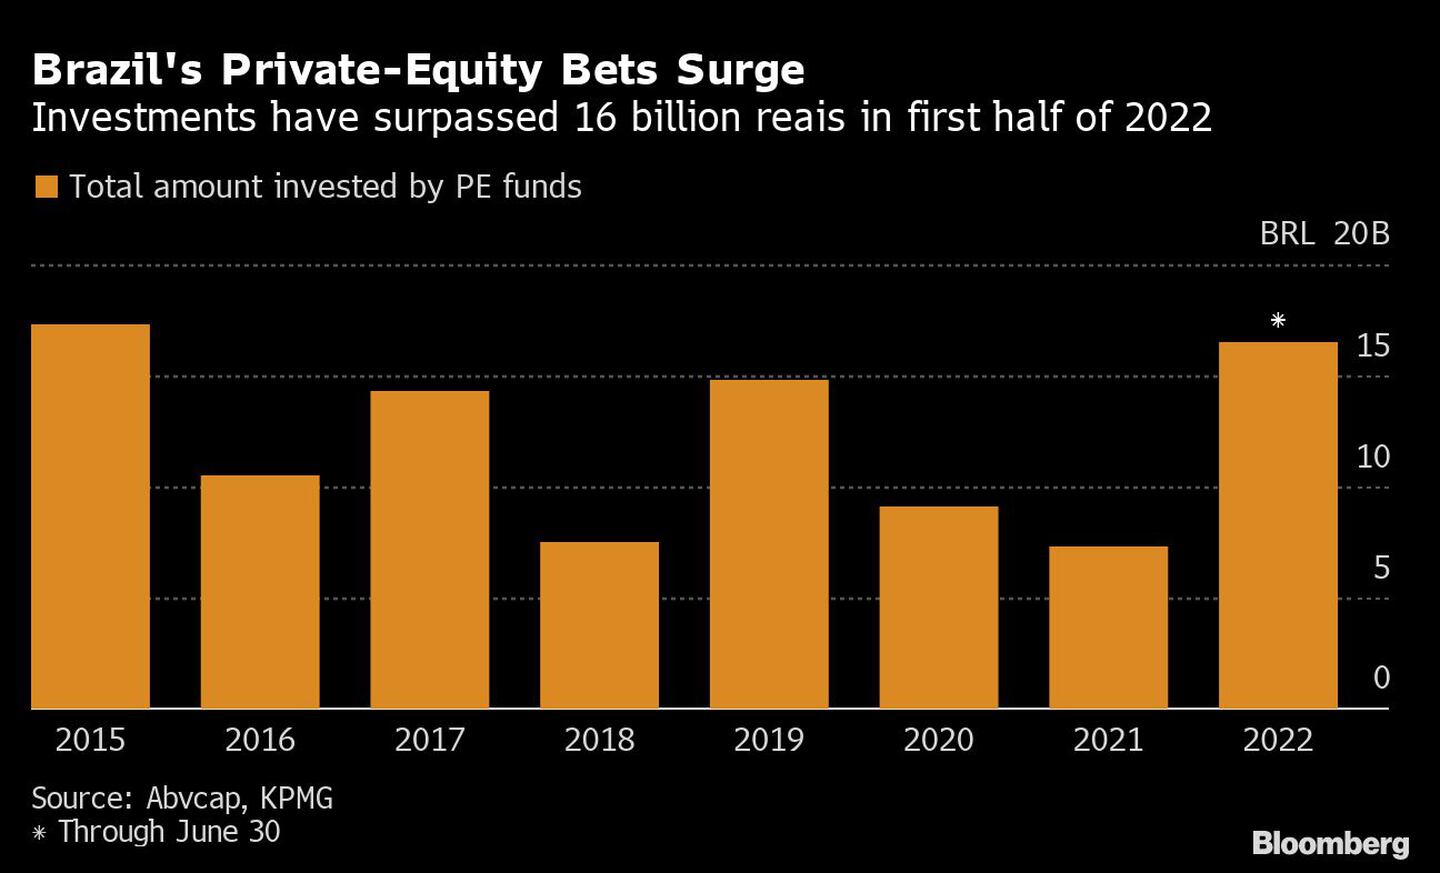 Brazil's Private-Equity Bets Surge | Investments have surpassed 16 billion reais in first half of 2022dfd